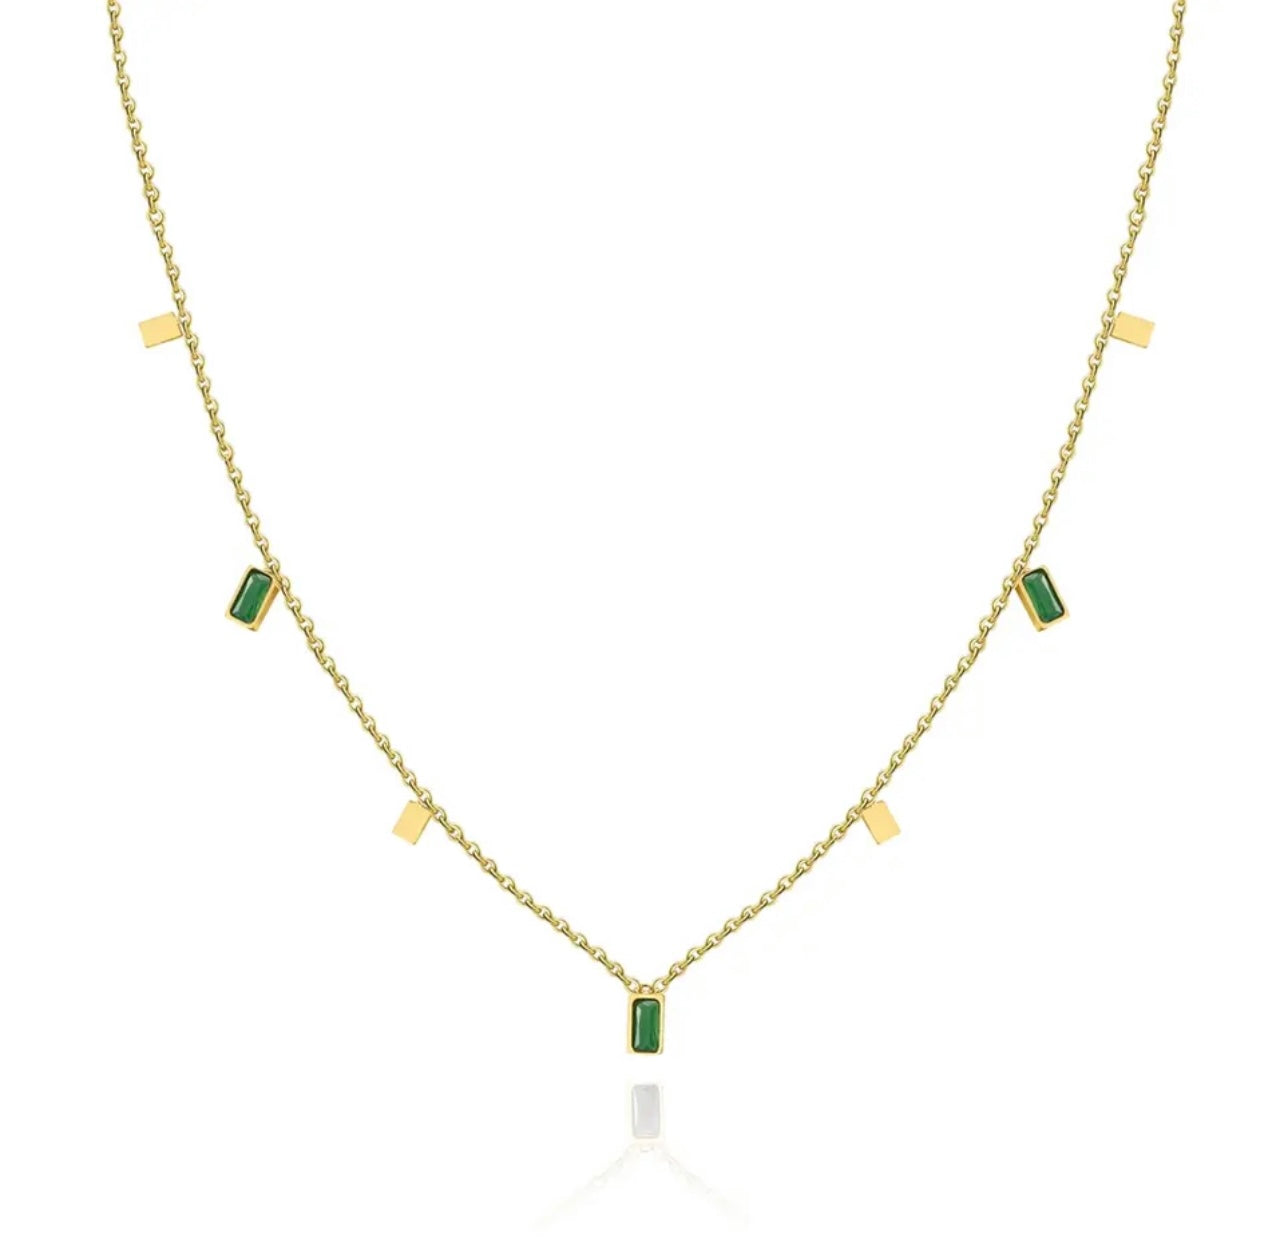 Choker Necklace with Green Crystals - Gold